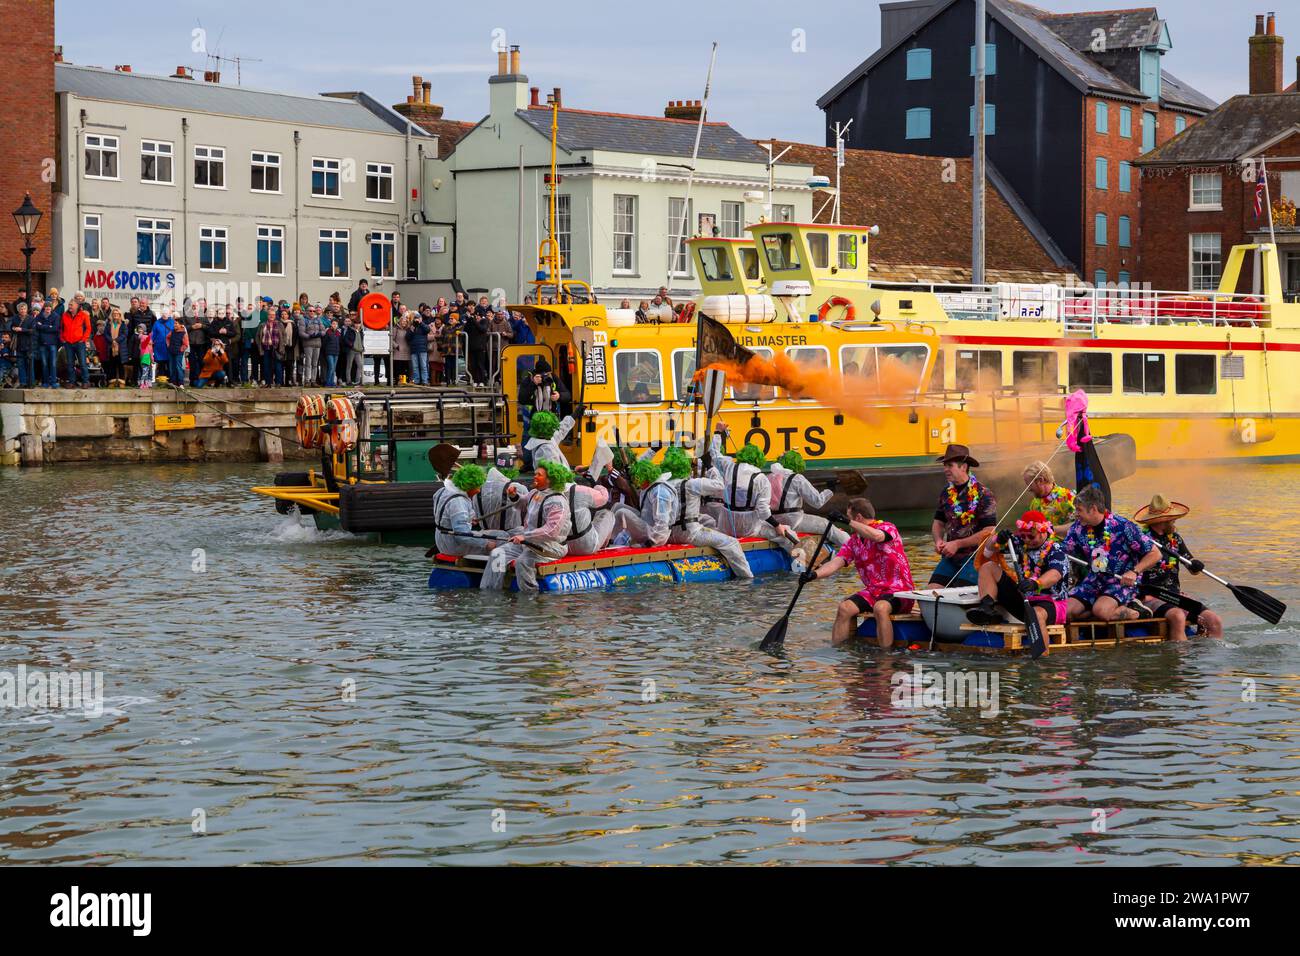 Poole, Dorset, UK. 1st January, 2024. The New Years Day Bath Tub Race takes place with plenty of thrill, spills and sabotage! Thousands turn out to watch the event, as a variety of unusual home made crafts take to the water to race, with participants having fun, throwing eggs and flour and capsizing competing craft. A feel good start to the New Year. Credit: Carolyn Jenkins/Alamy Live News Stock Photo